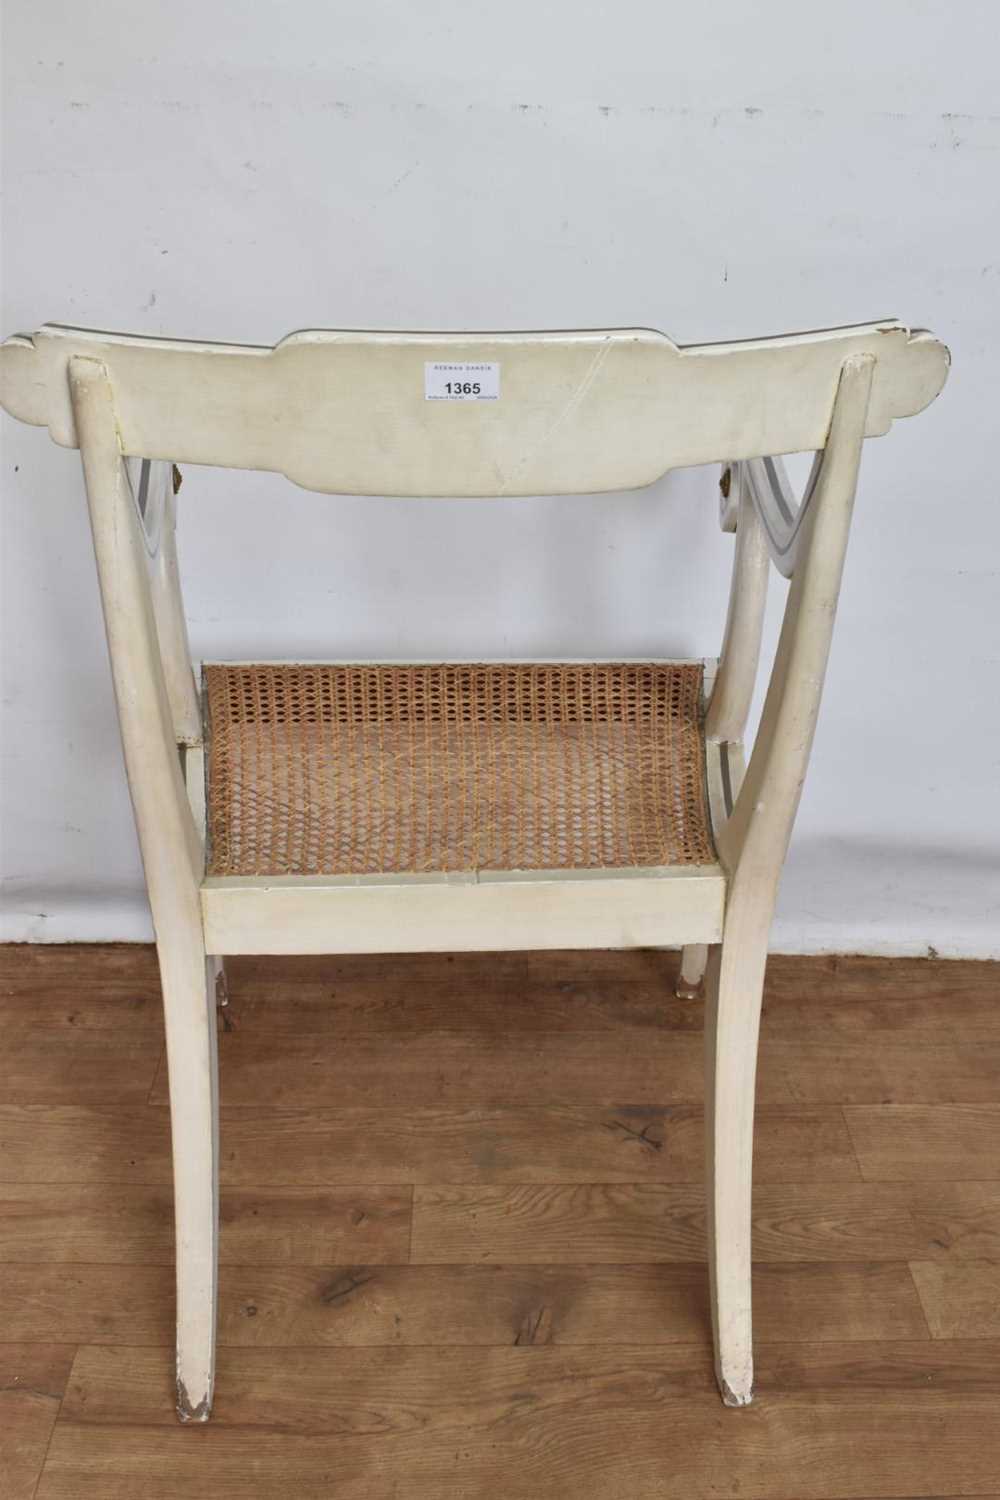 Pair of Regency style white painted and parcel gilt open elbow chairs with cane seats on sabre legs - Image 9 of 9